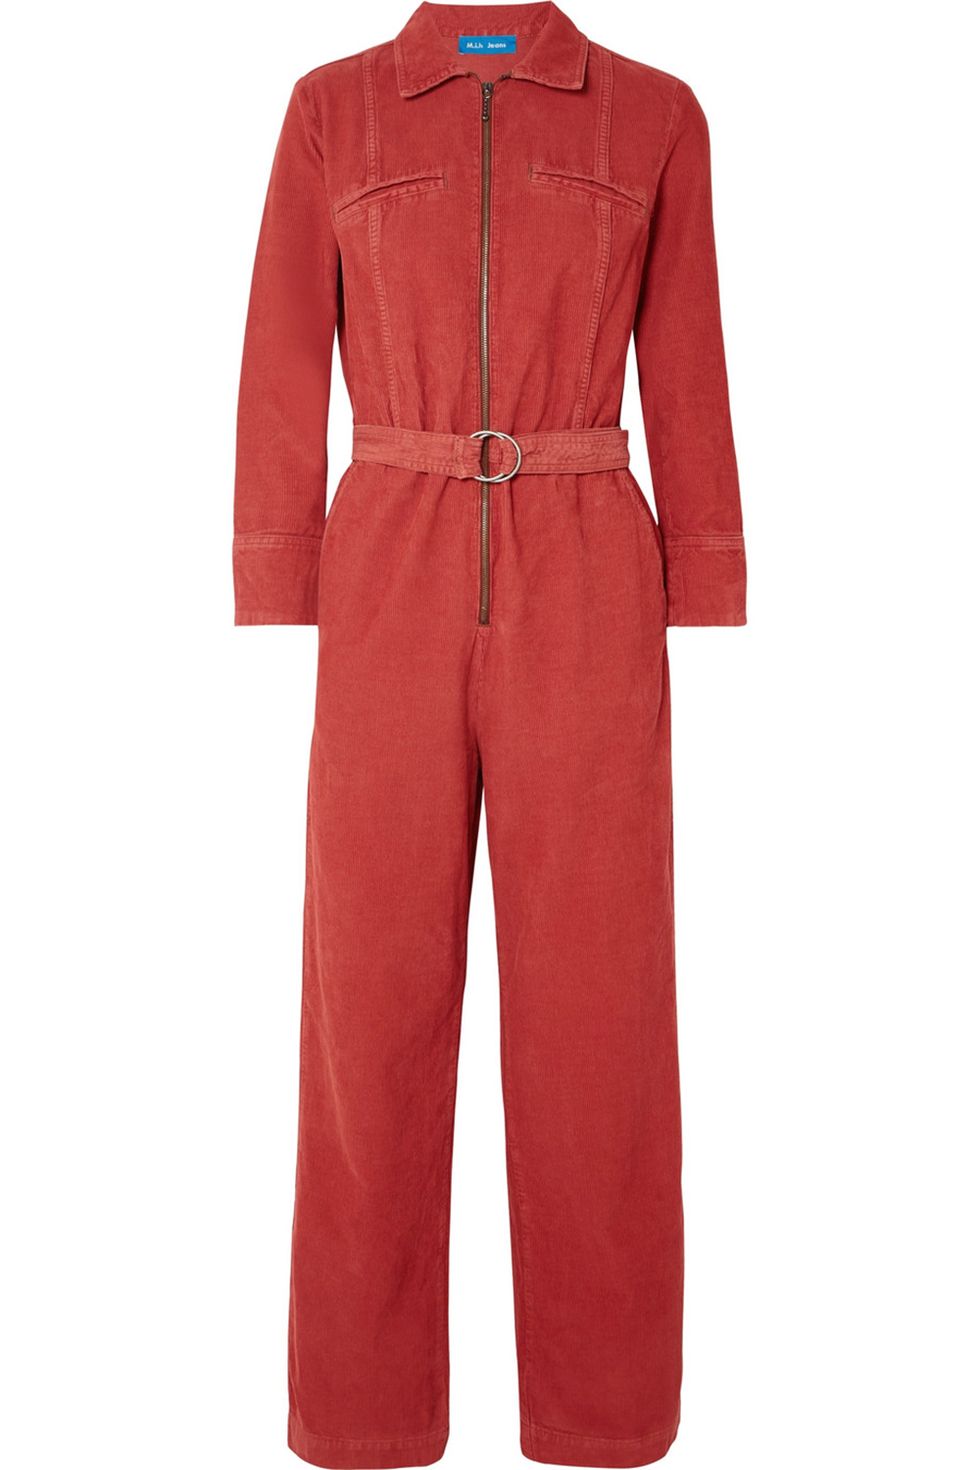 Clothing, Red, Suit, Orange, Sleeve, Outerwear, Workwear, Trousers, Overall, Dress, 